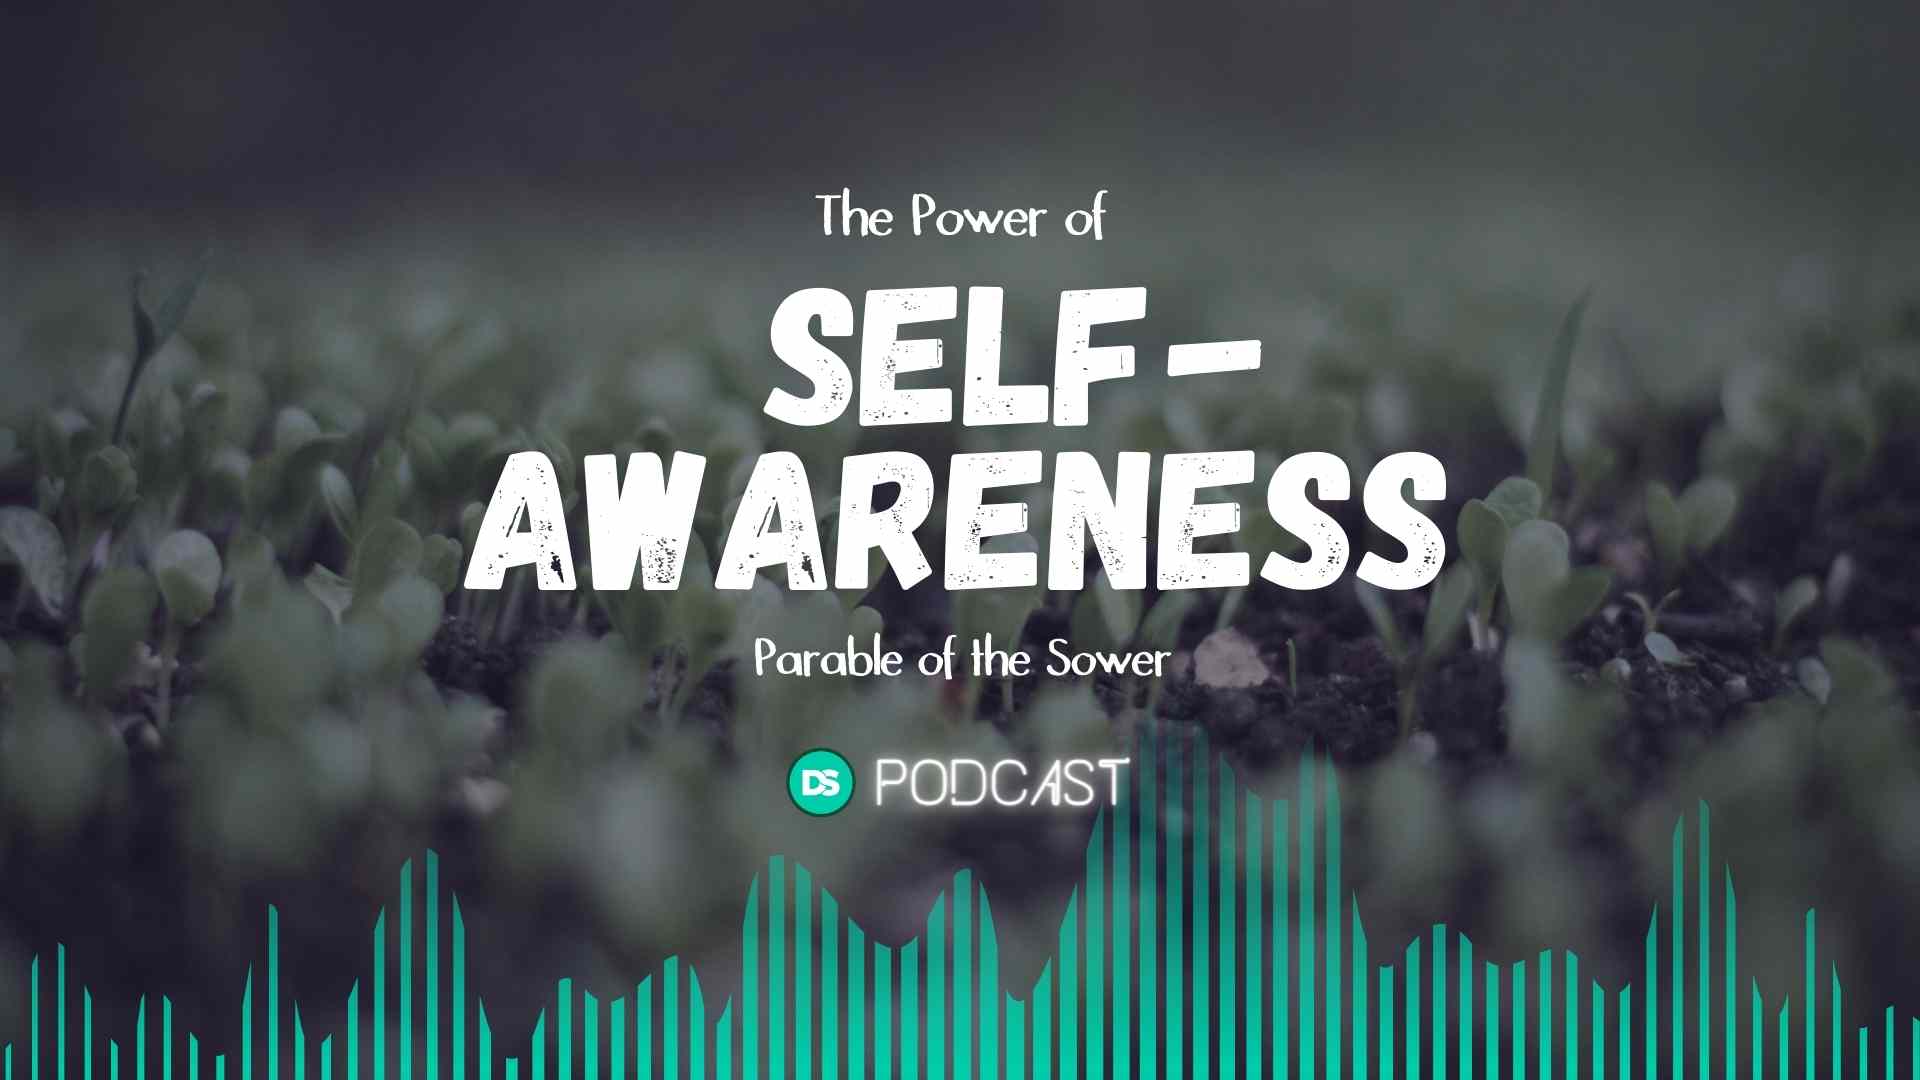 The Parable of the Sower and the Power of Self-Awareness 10